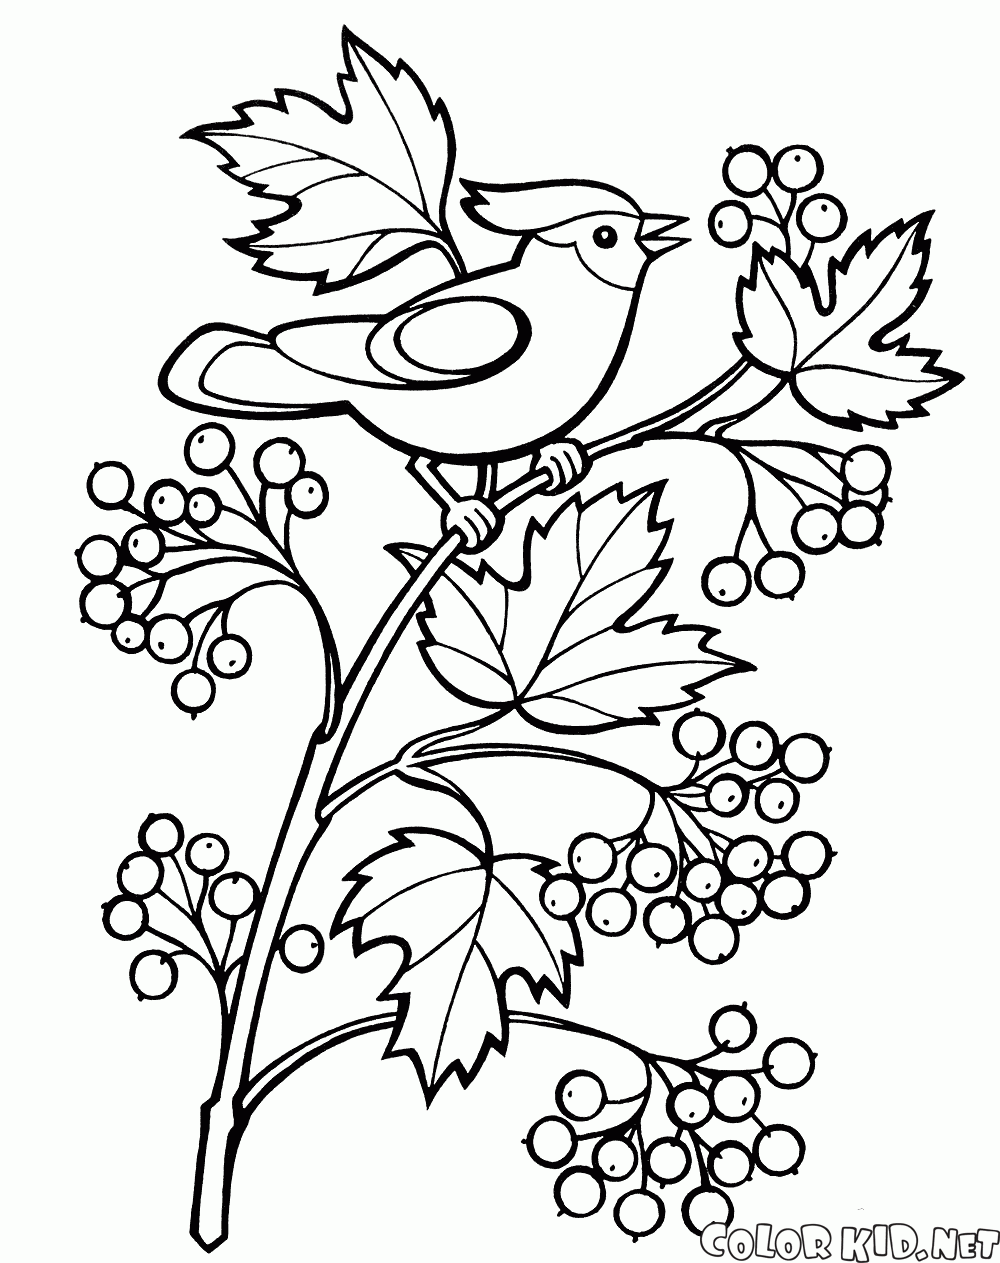 Coloring page Blueberries